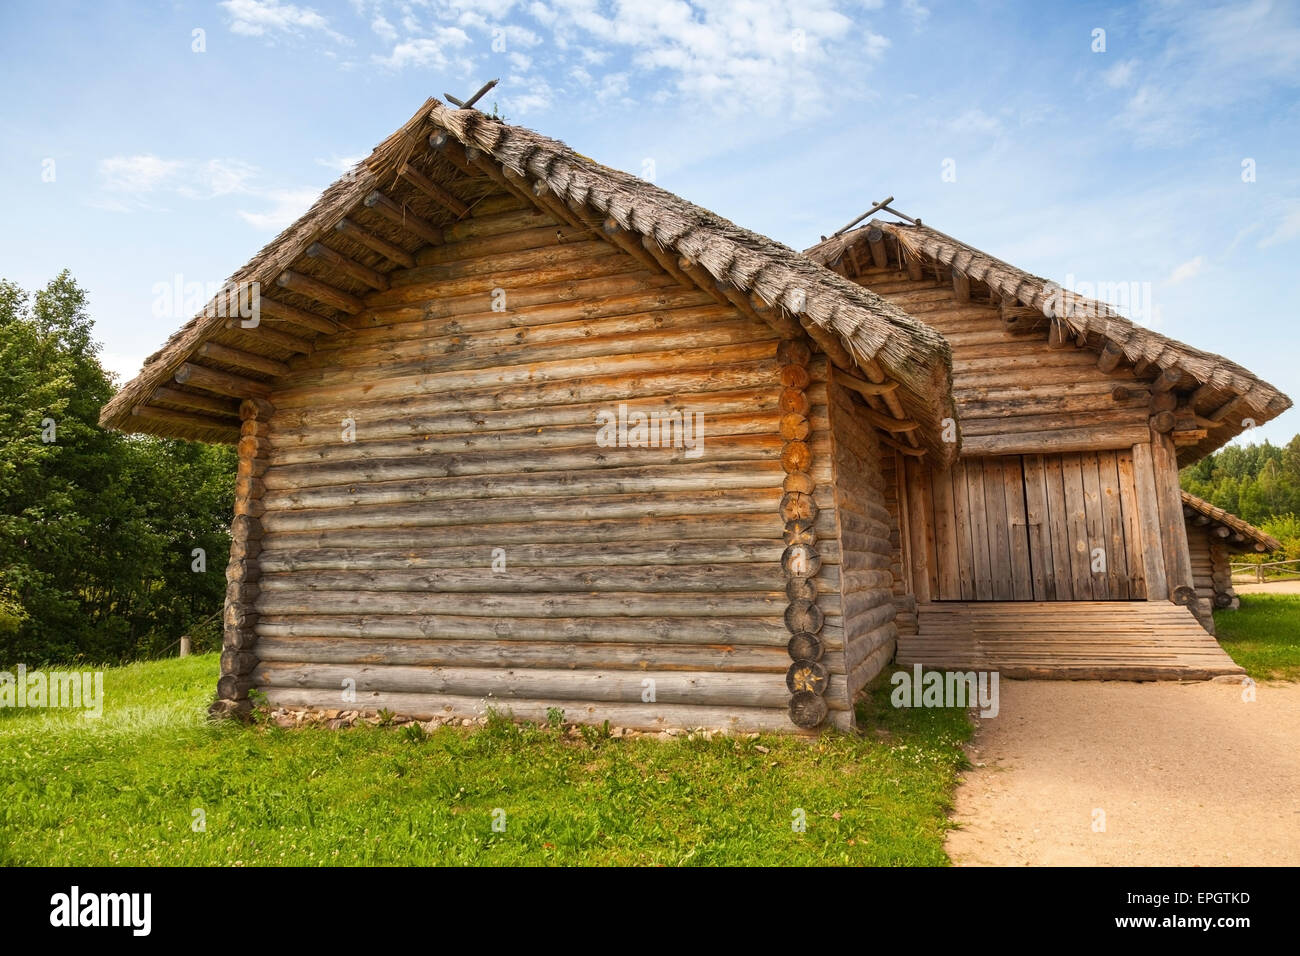 Russian rural wooden architecture example, old barn with locked gate Stock Photo